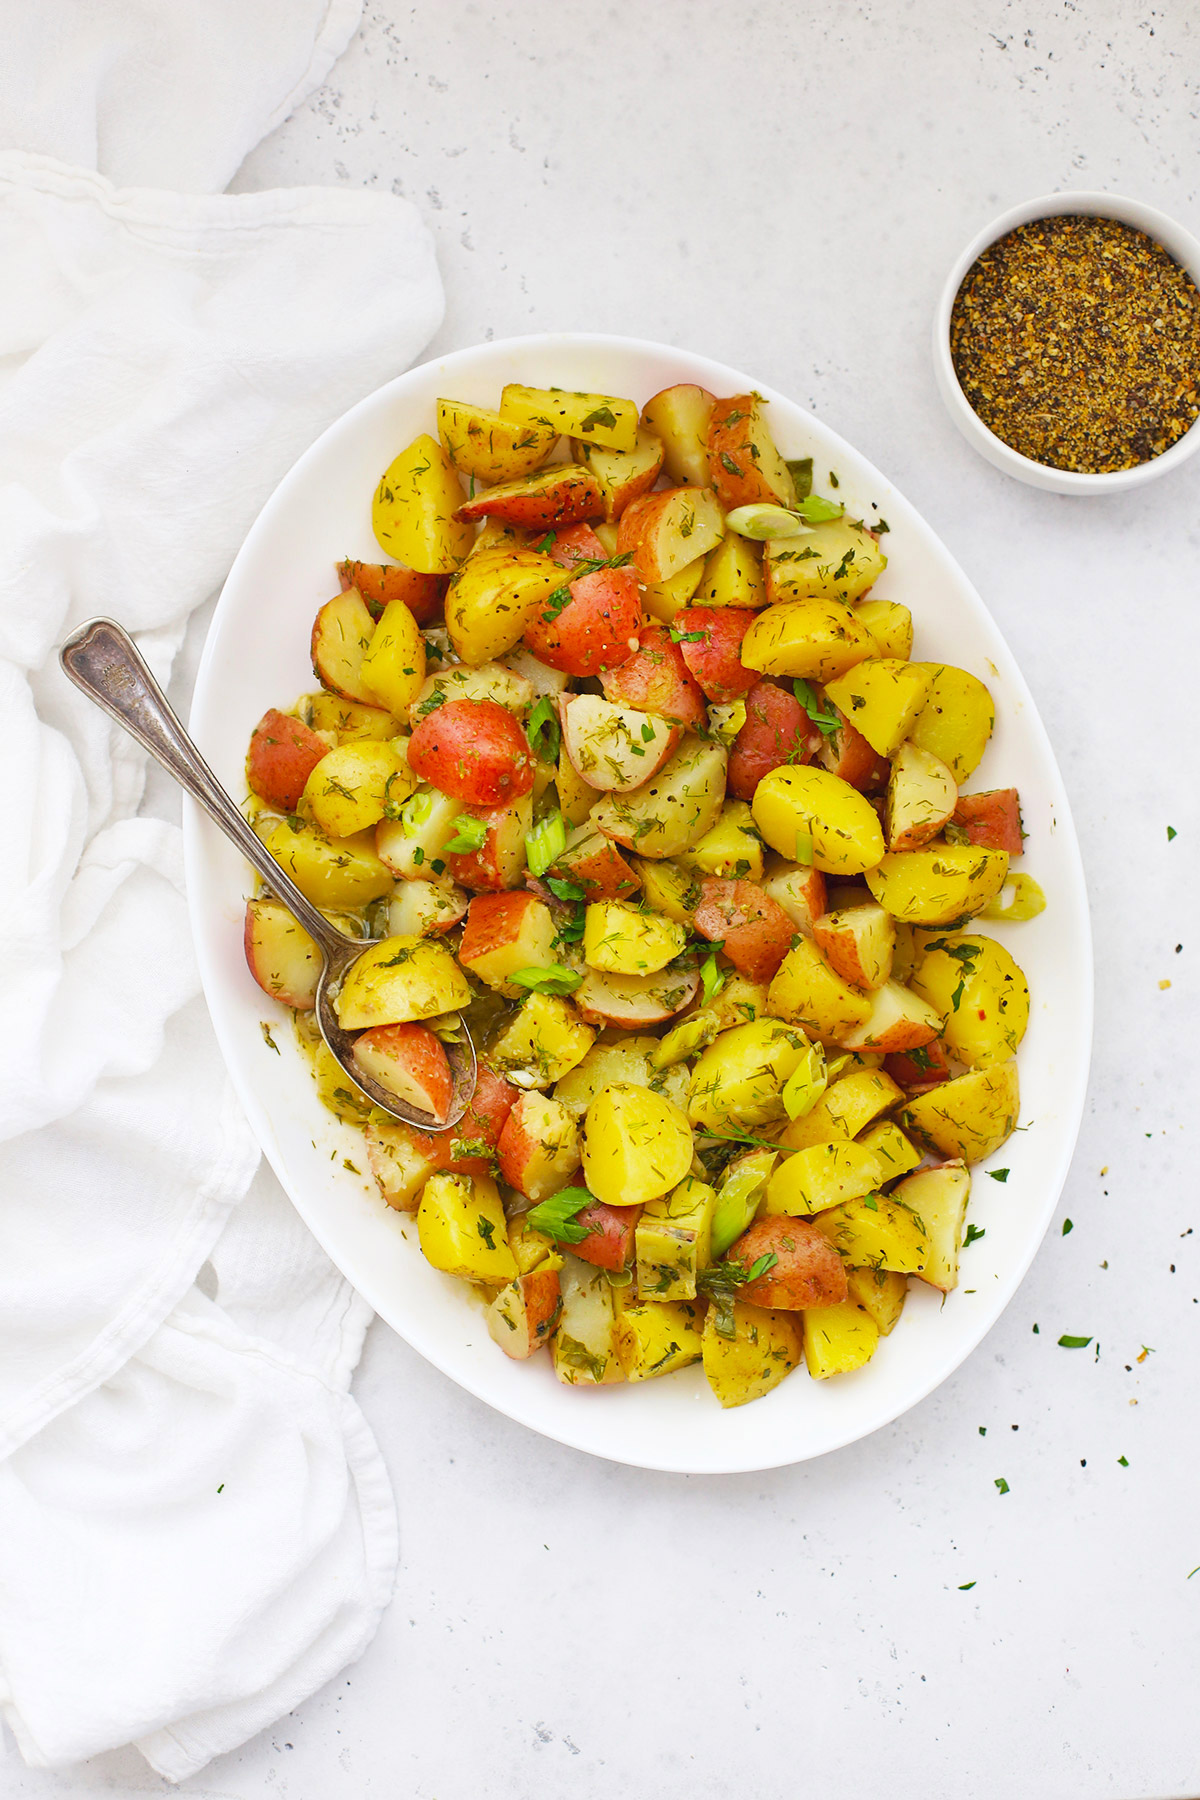 French Potato Salad with Vinaigrette from One Lovely Life